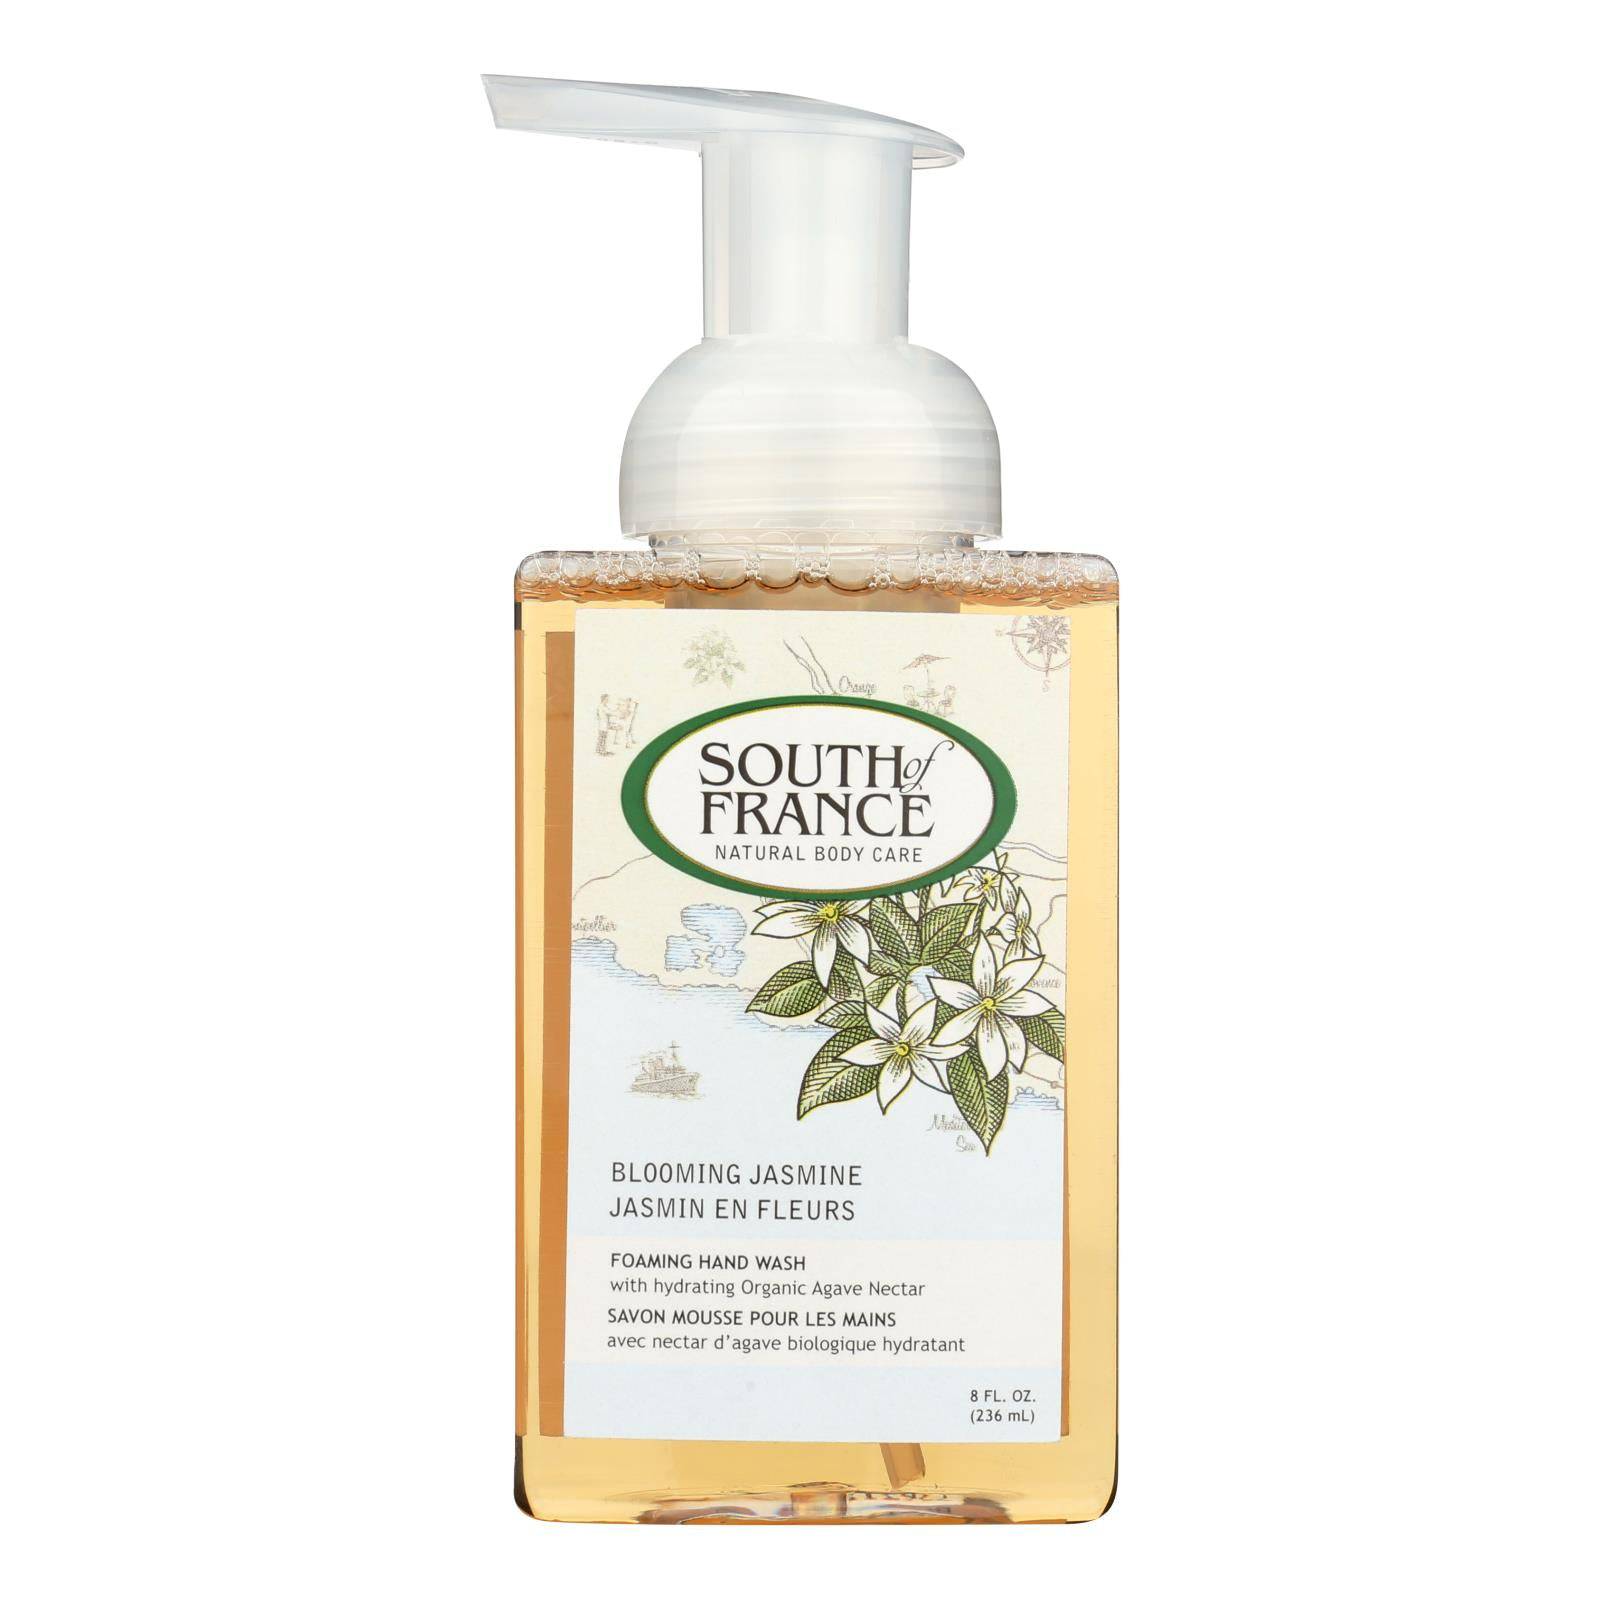 South Of France Hand Soap - Foaming - Blooming Jasmine - 8 Oz - 1 Each | OnlyNaturals.us